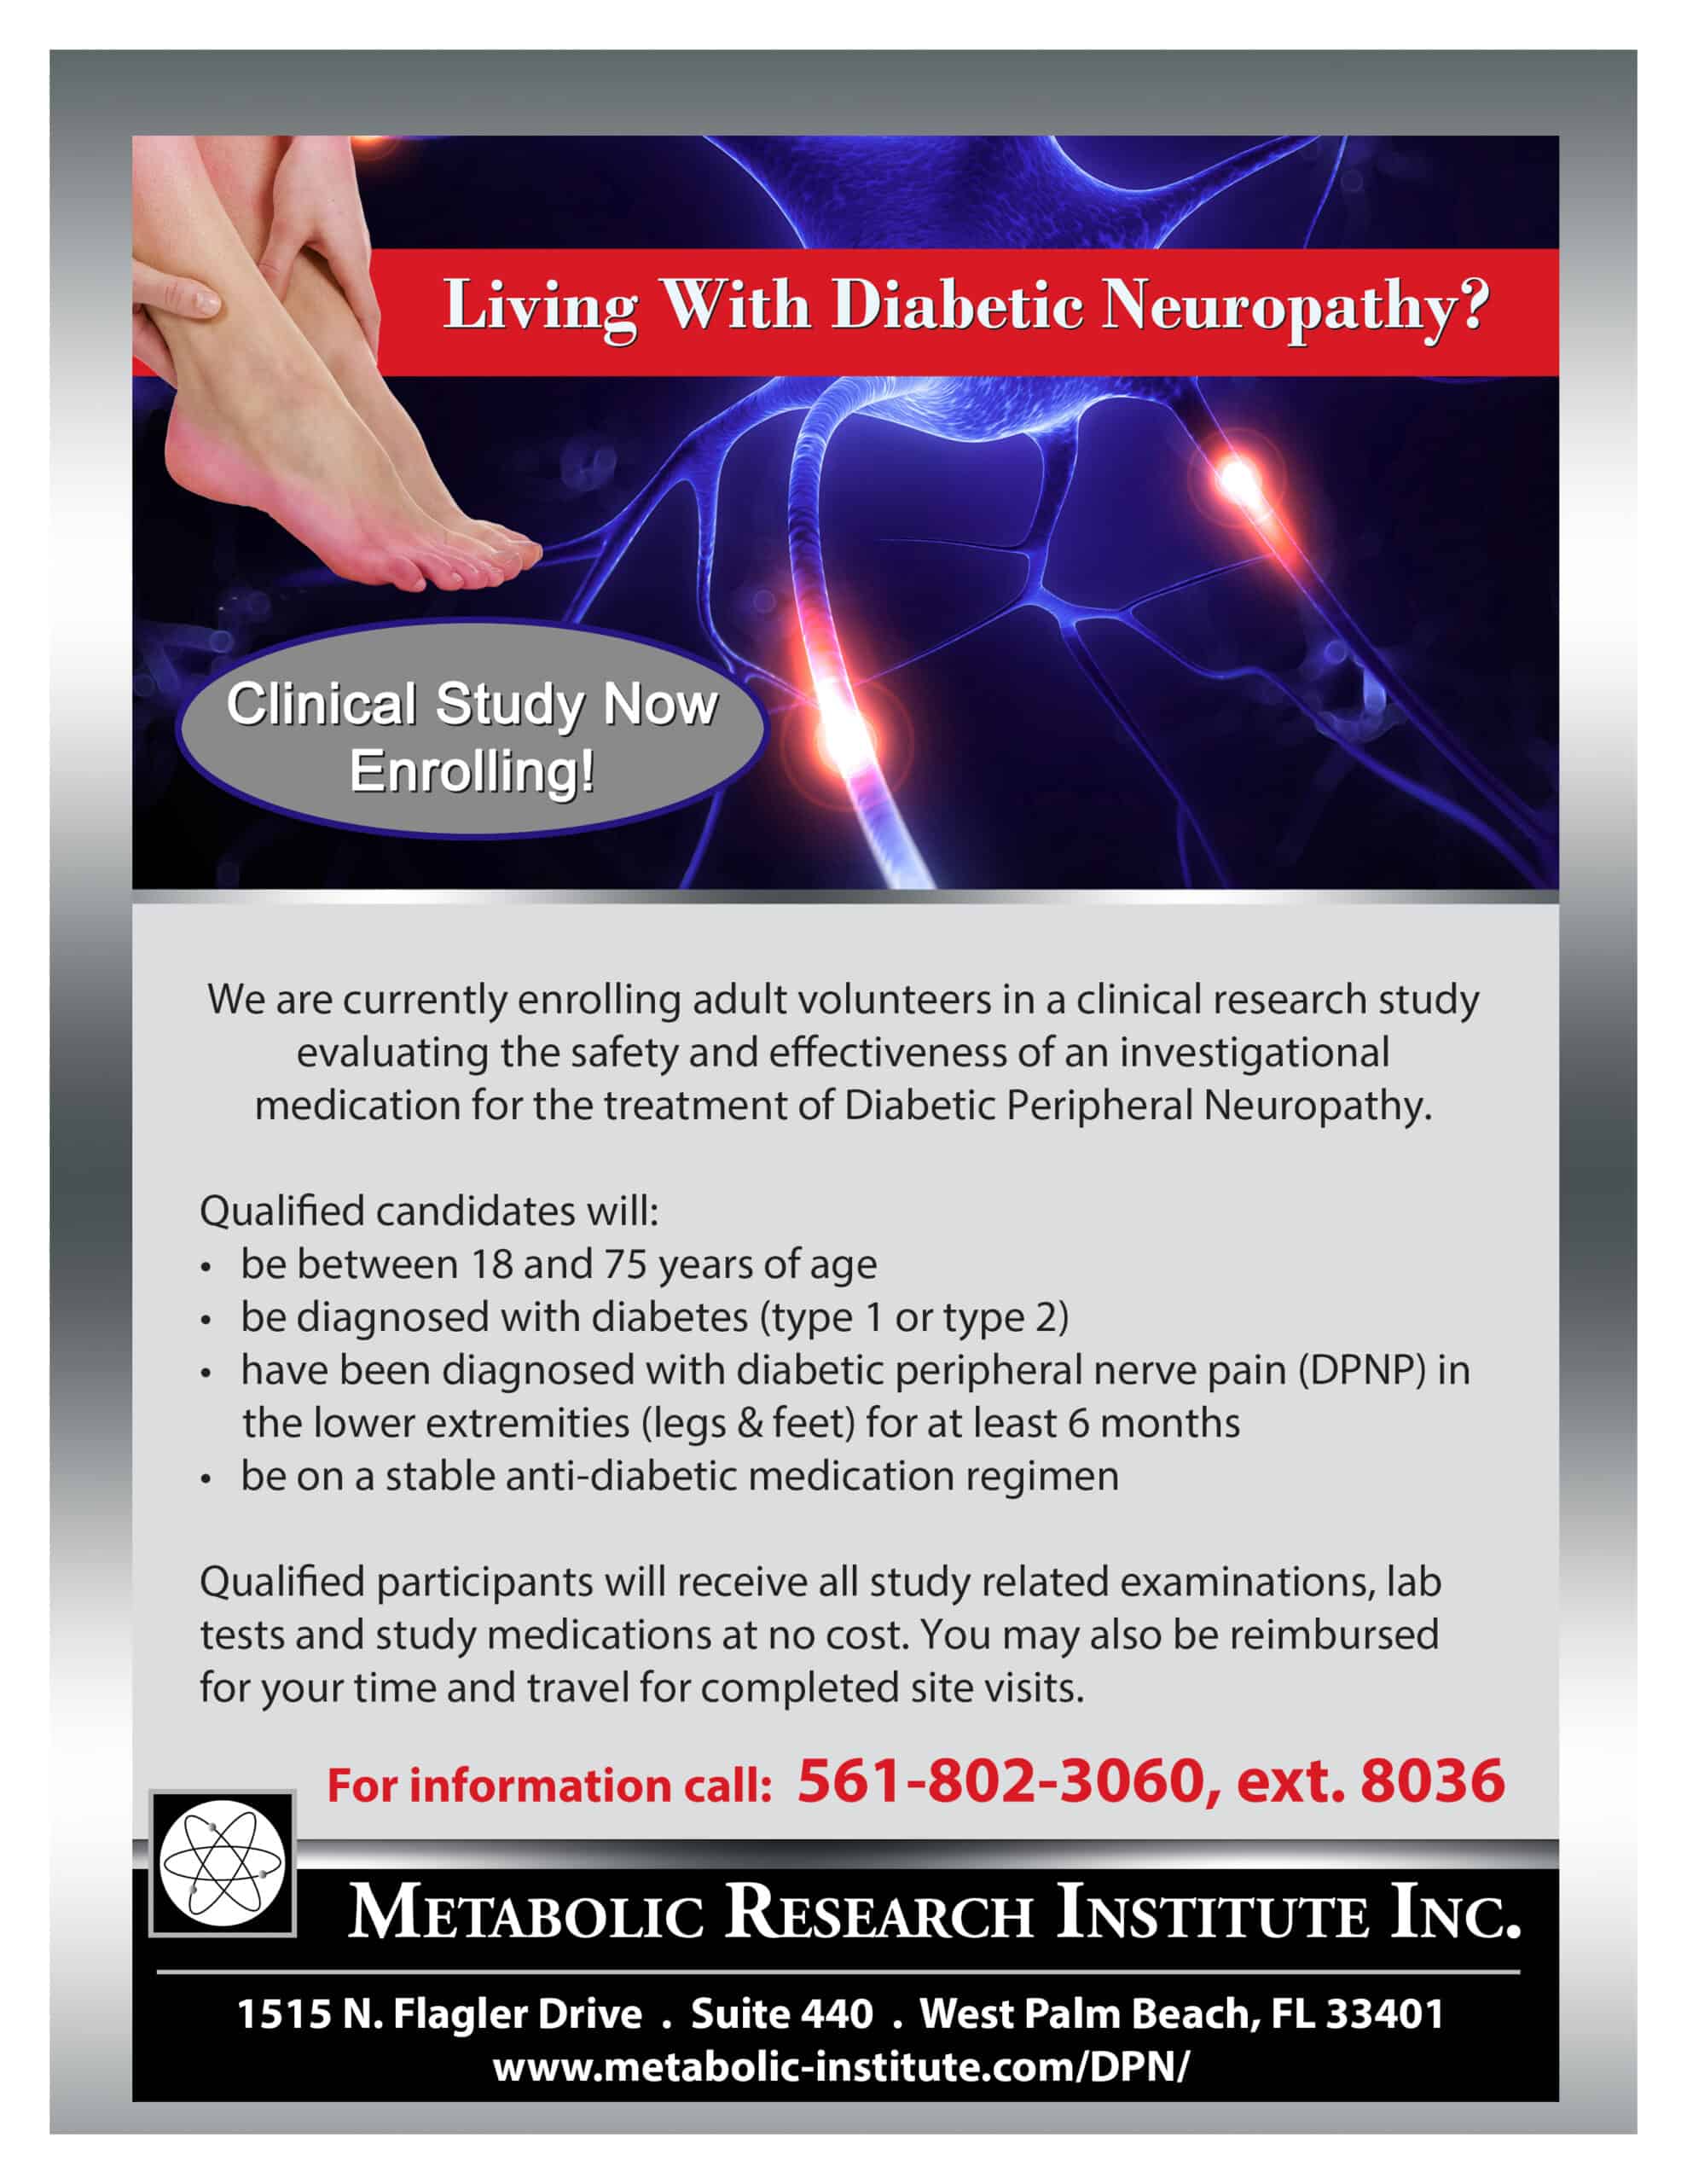 Clinical study flyer for adults suffering from Diabetic Peripheral Neuropathy in their lower limbs.